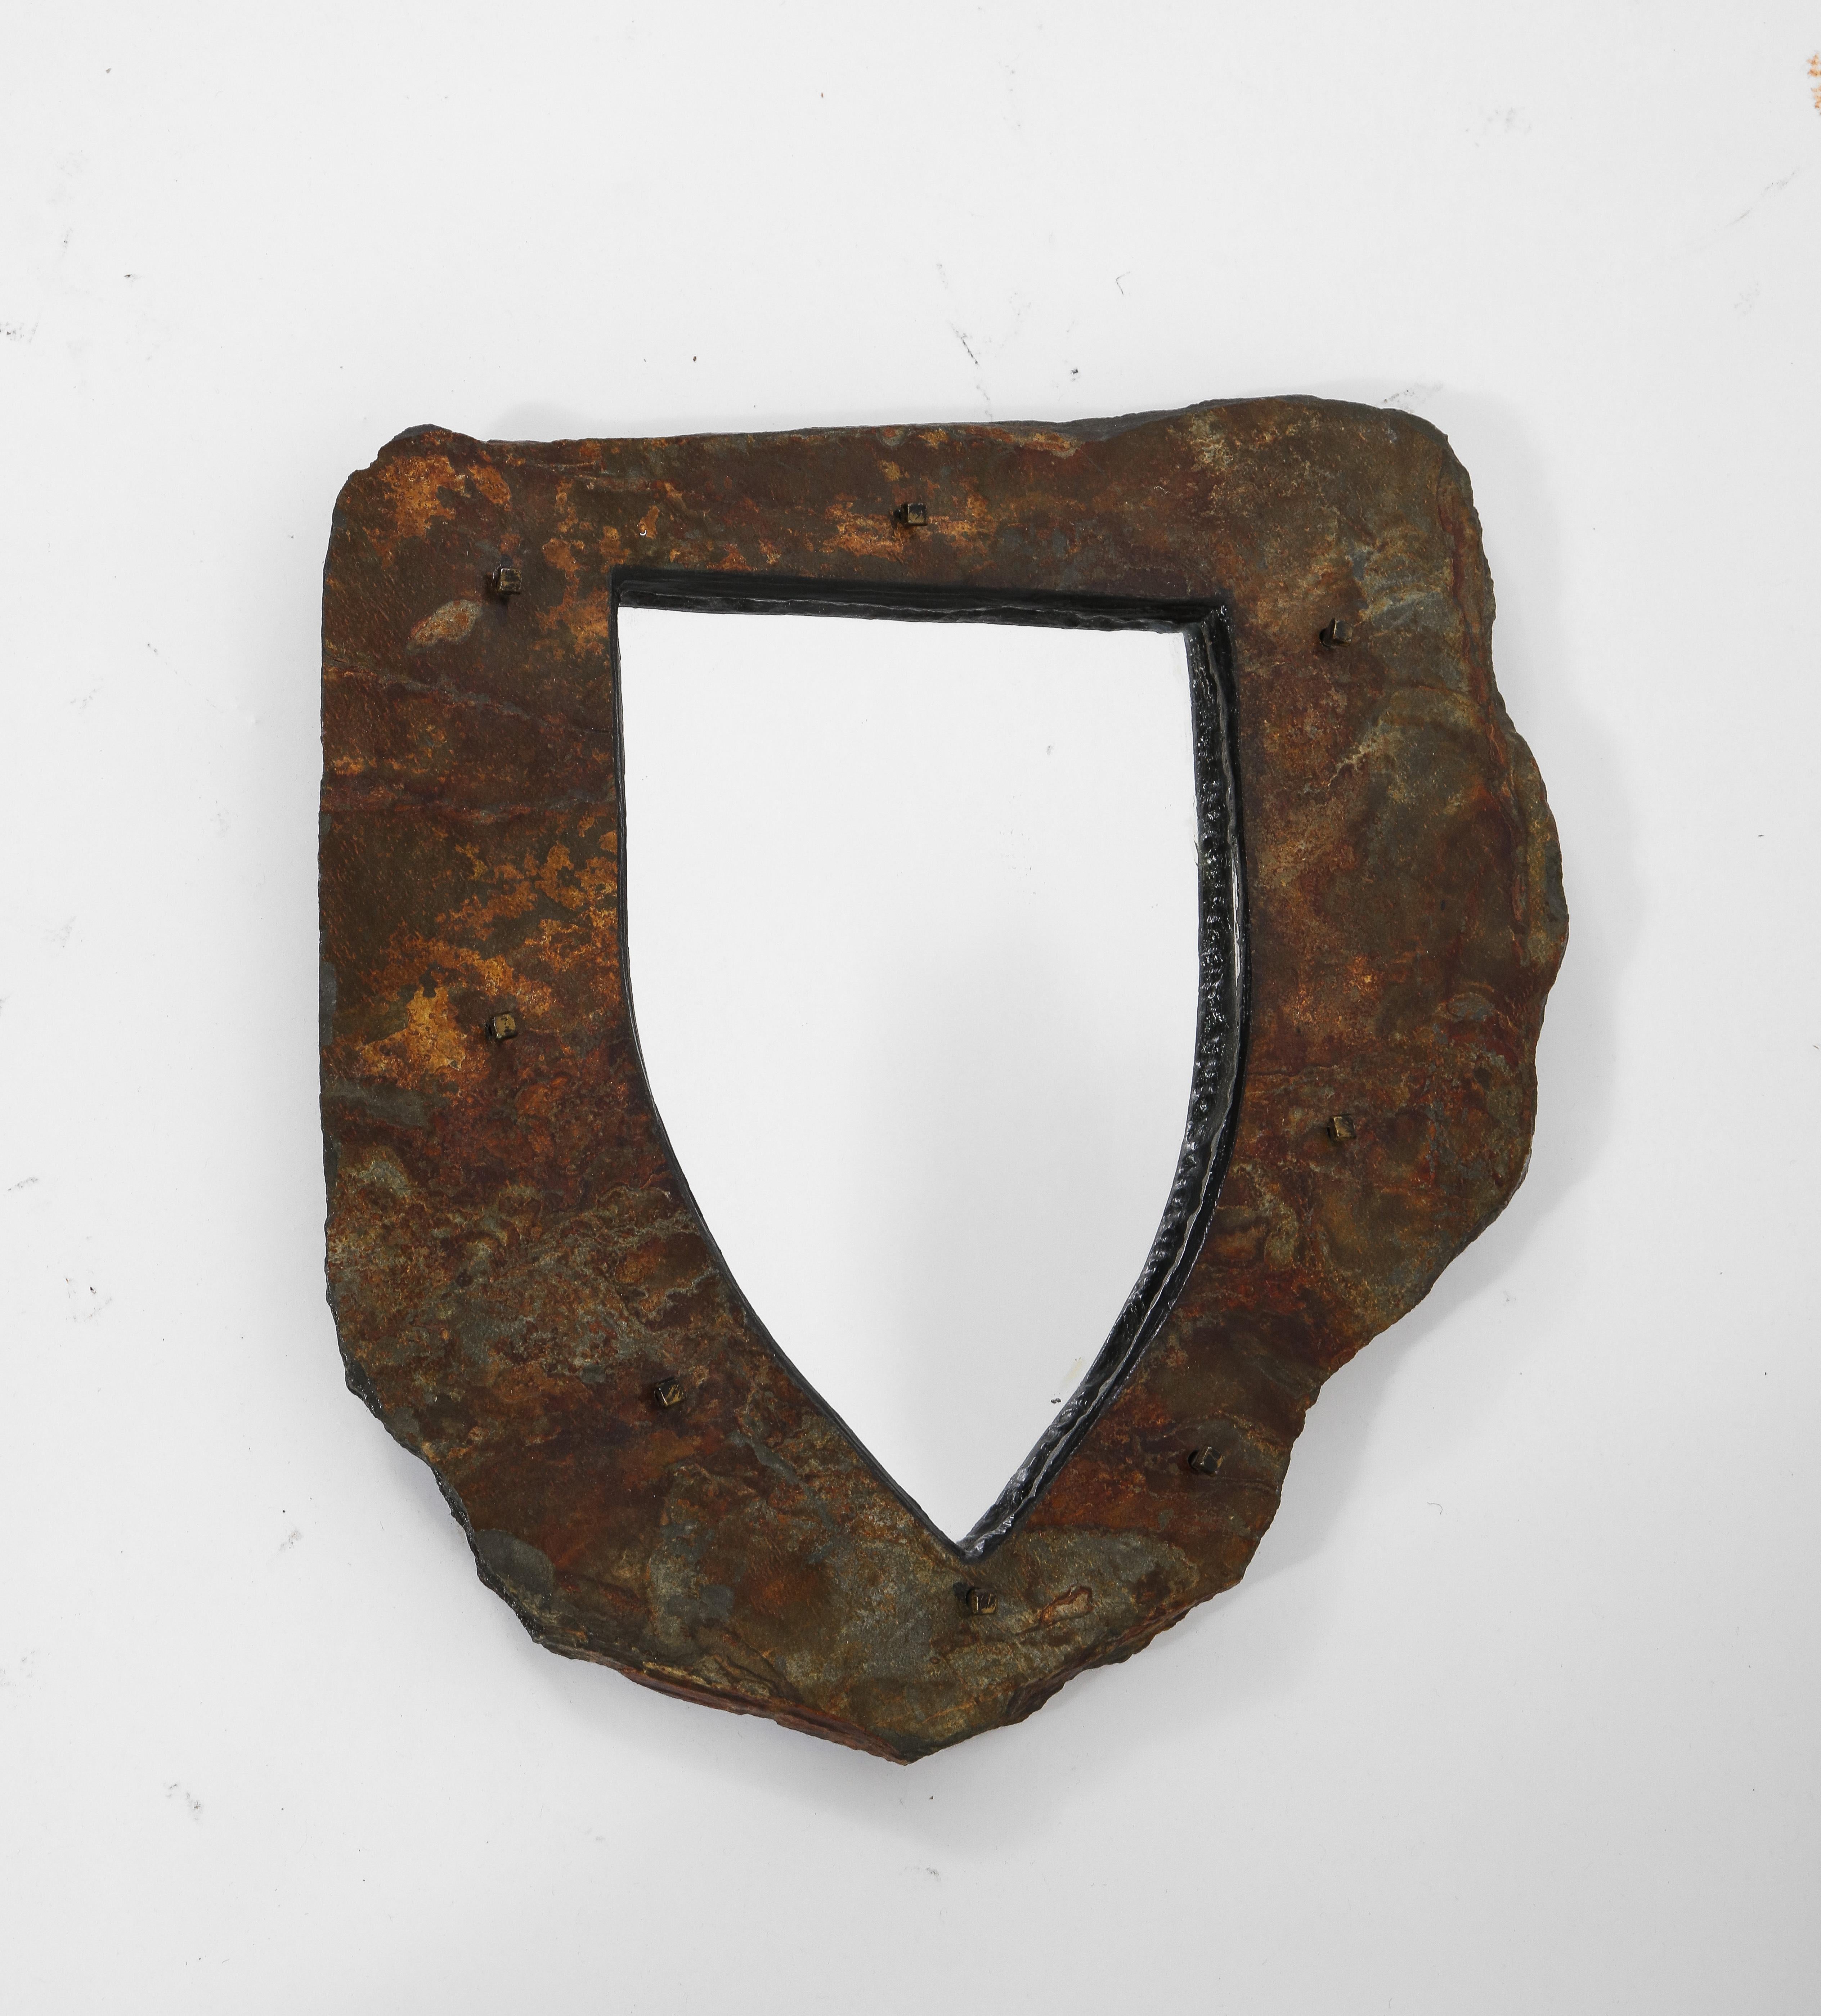 This distinct shield-shaped Brutalist mirror is composed of raw-edged schist in a deep coffee hinted with ochre. Metal rivets punctuate the frame of rough stone.